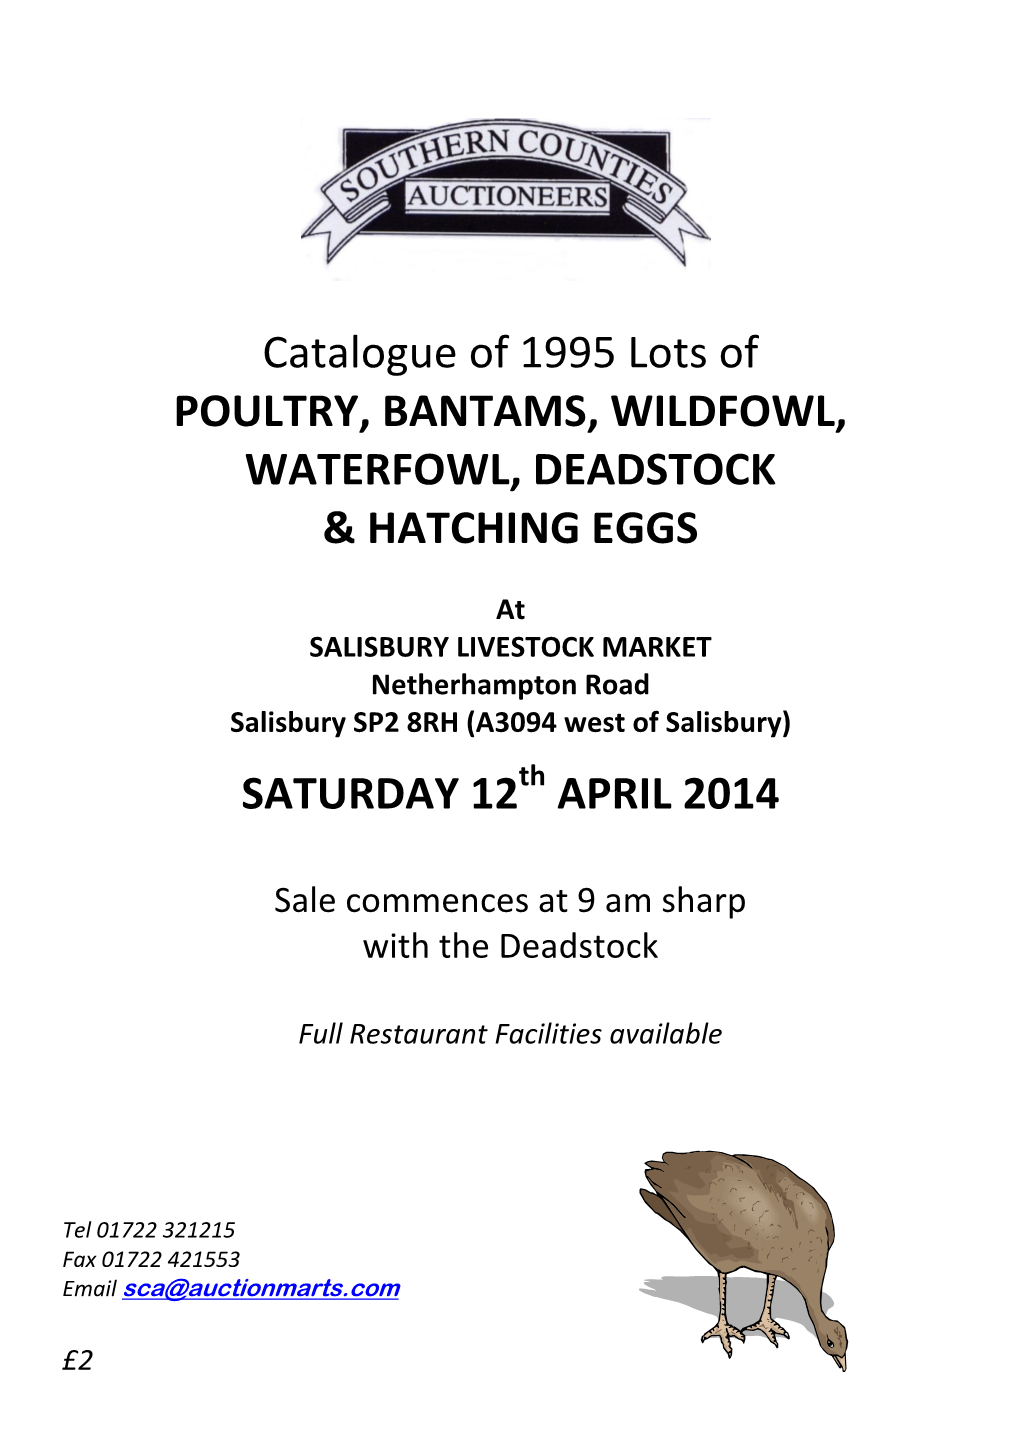 Catalogue of 1995 Lots of POULTRY, BANTAMS, WILDFOWL, WATERFOWL, DEADSTOCK & HATCHING EGGS